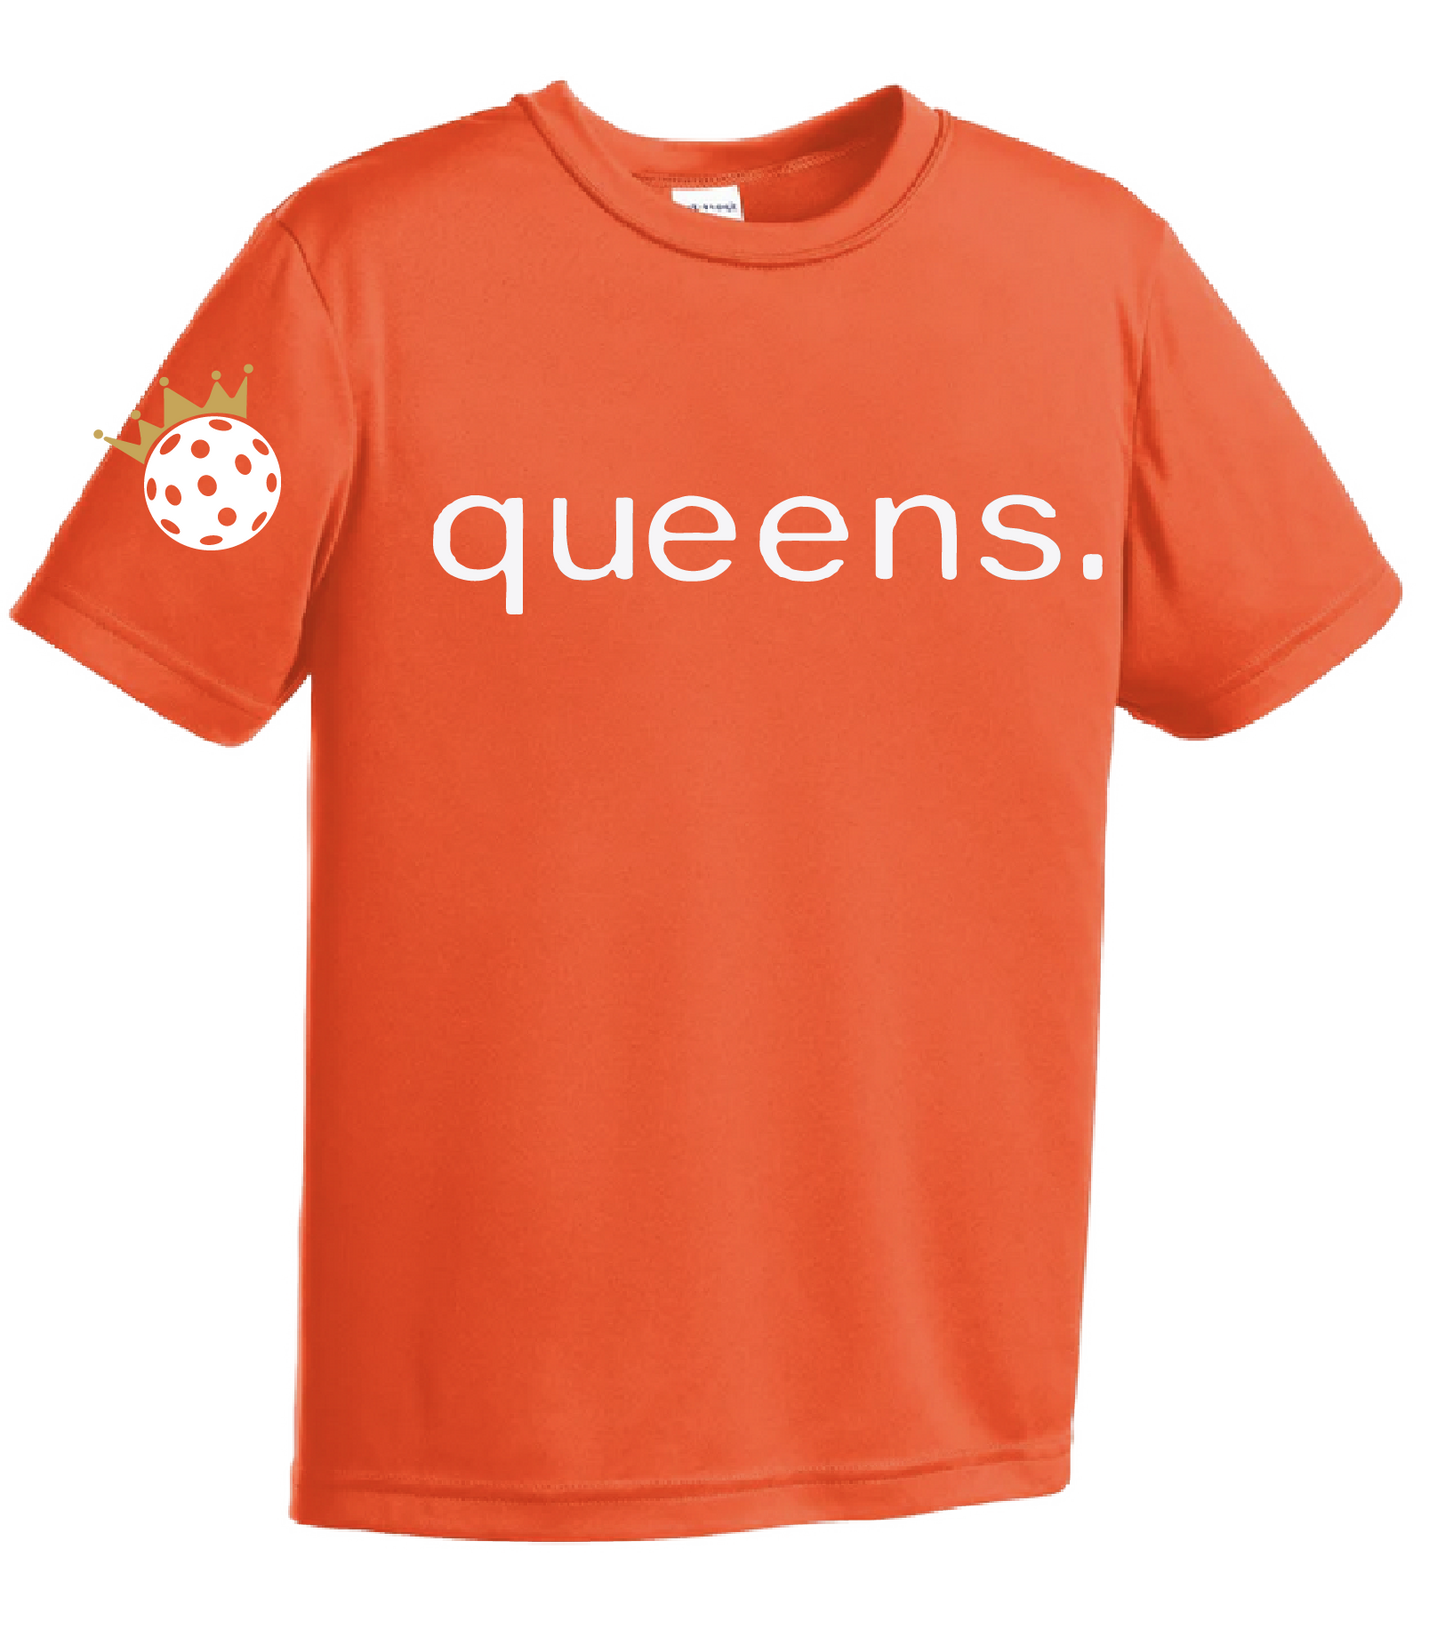 Youth-size Short Sleeve shirts feature Pickleball Queen and Crown Design motifs. Lightweight and breathable, these moisture-wicking shirts are designed for athletic performance and utilize PosiCharge technology to keep colors vibrant and logos from fading. Wearers will appreciate the comfort of the removable tags and set-in sleeves. A reliable, stylish choice for pickleball enthusiasts of all ages.